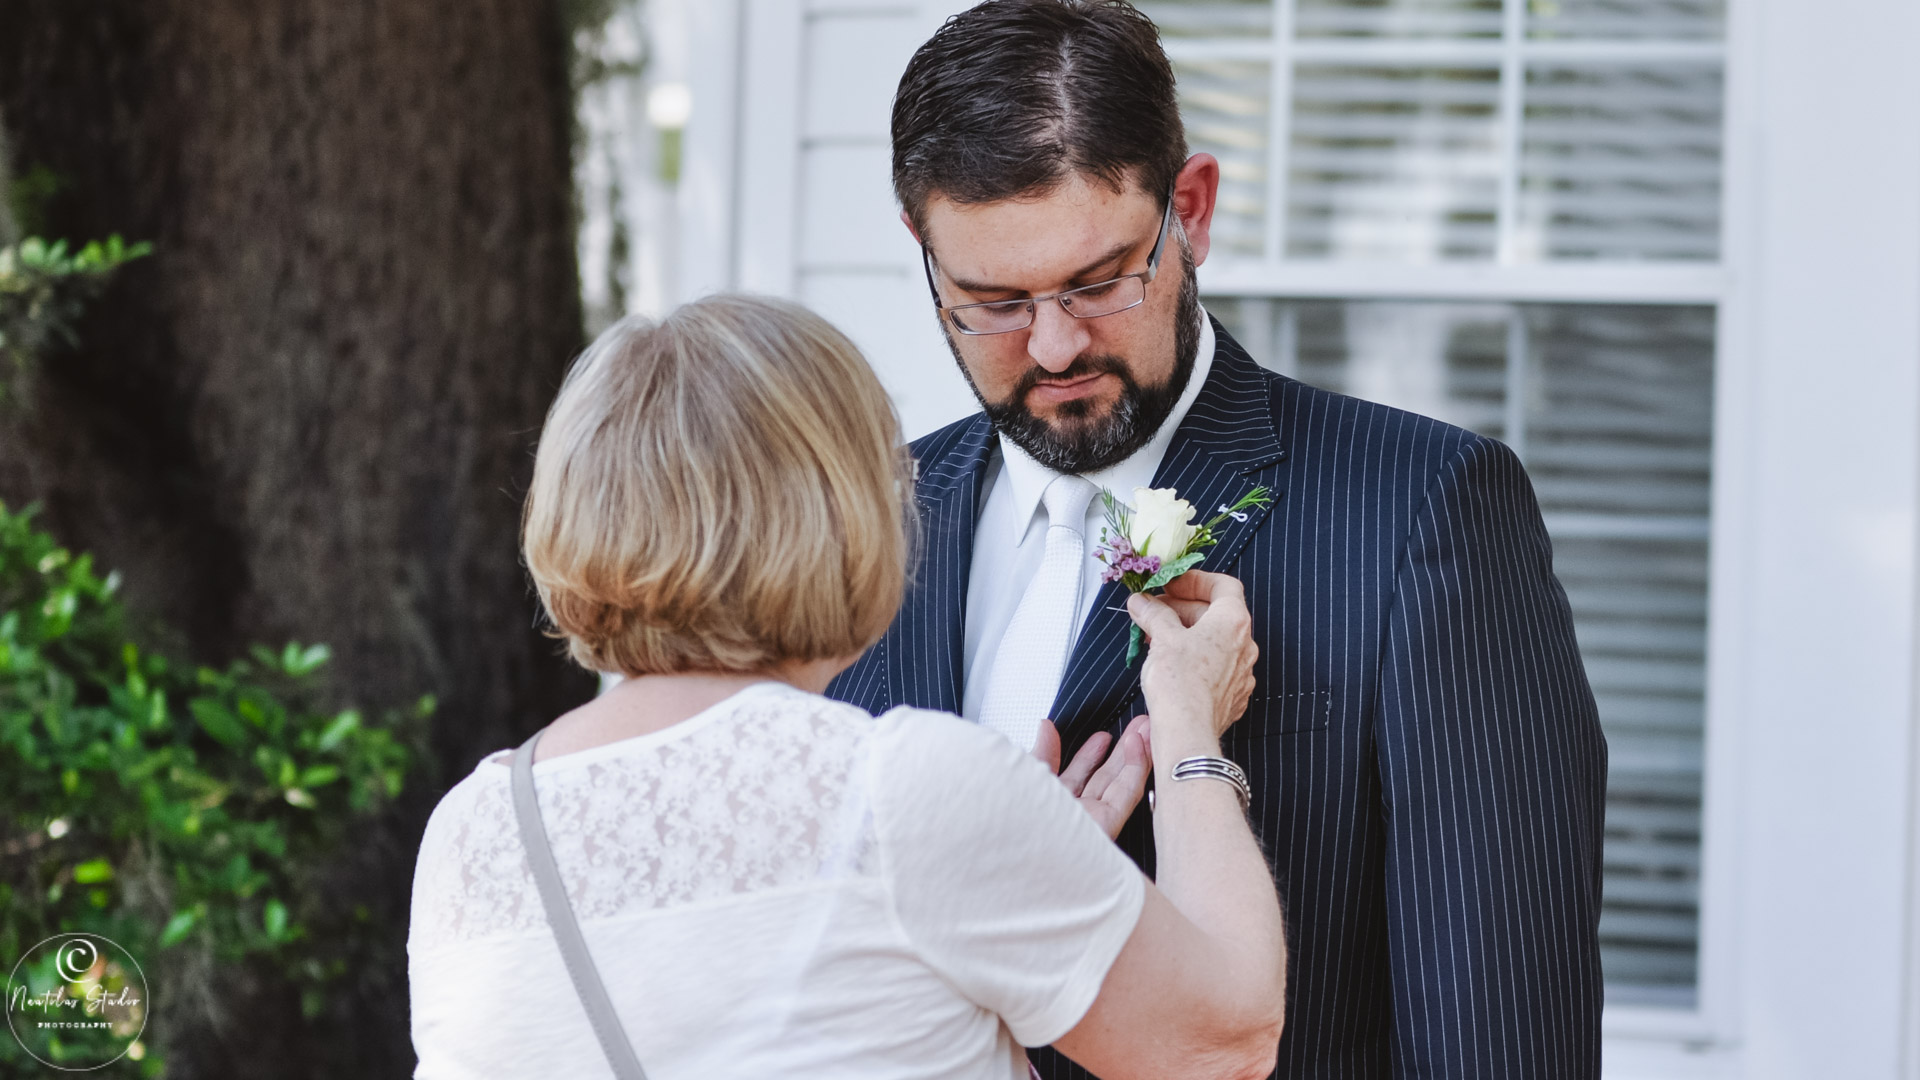 Photo showing mother of groom pinning on boutonniere